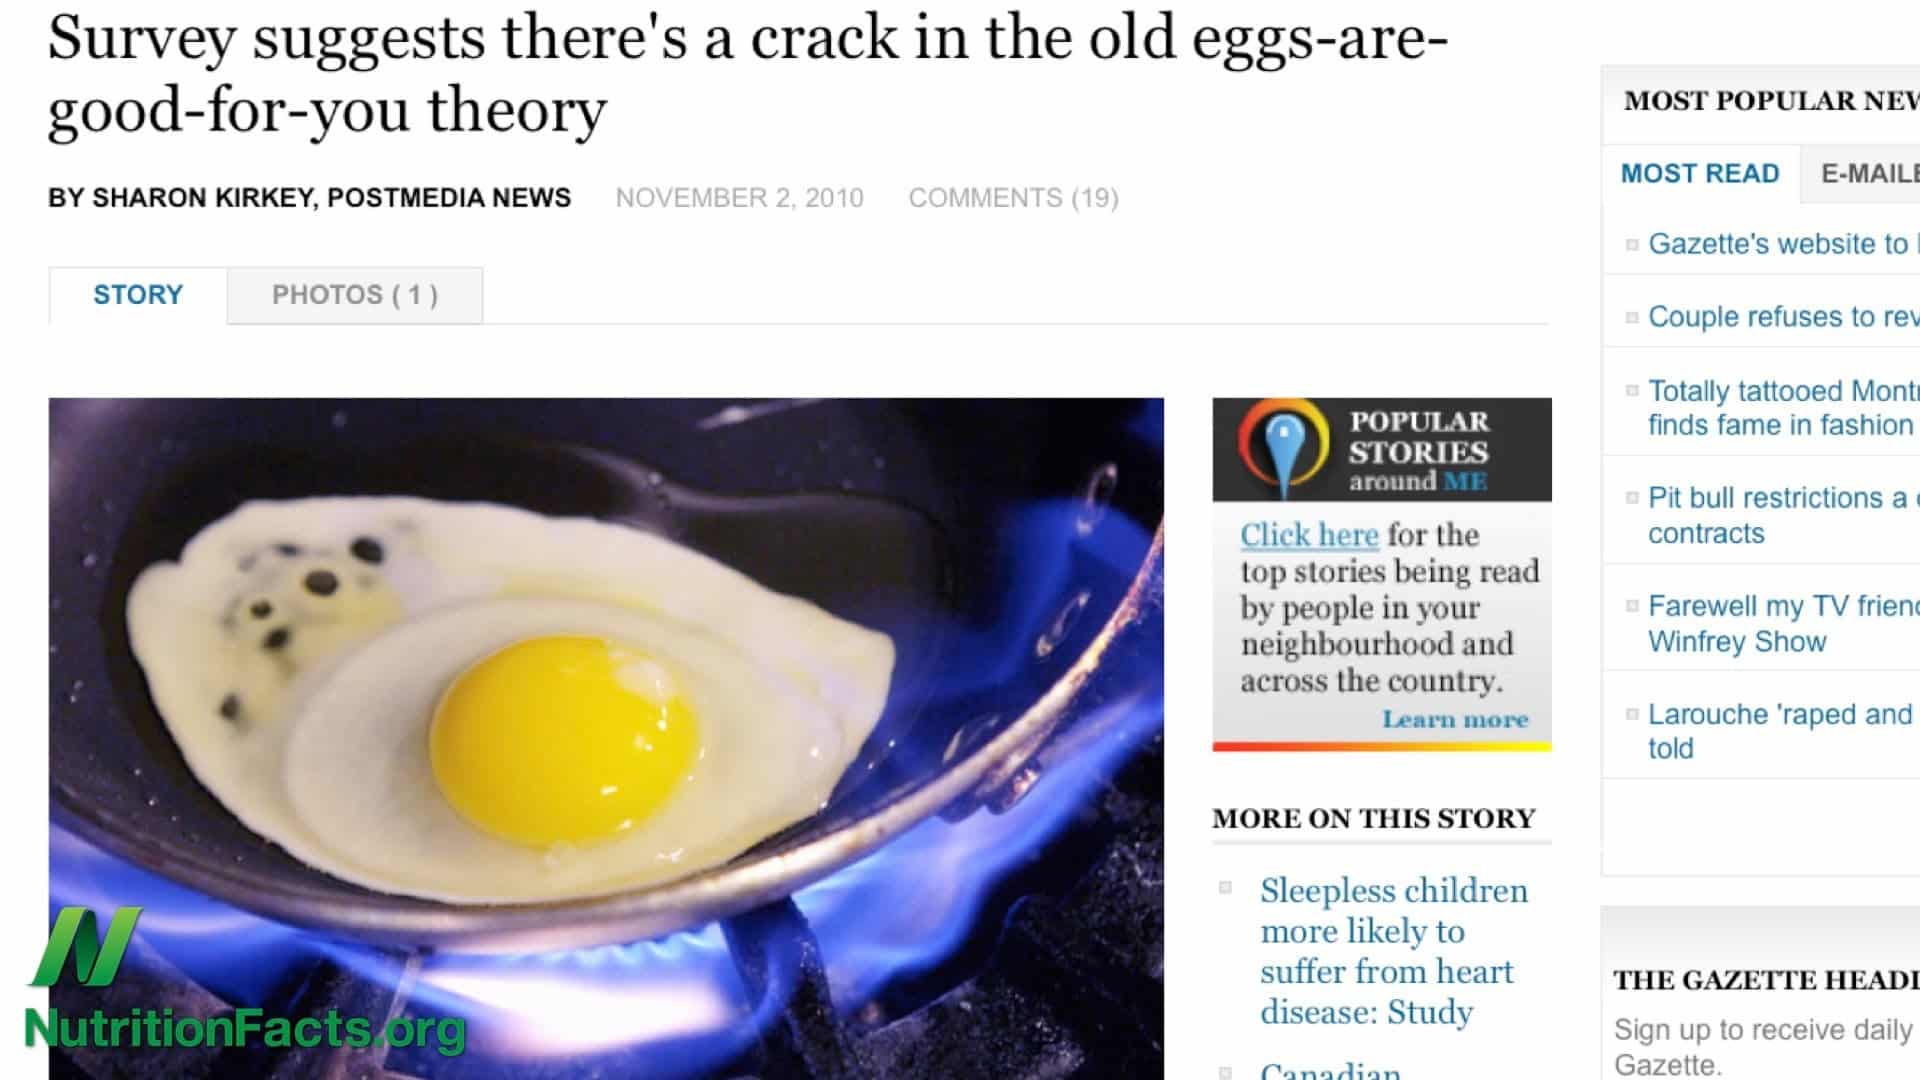 Egg cholesterol in the diet